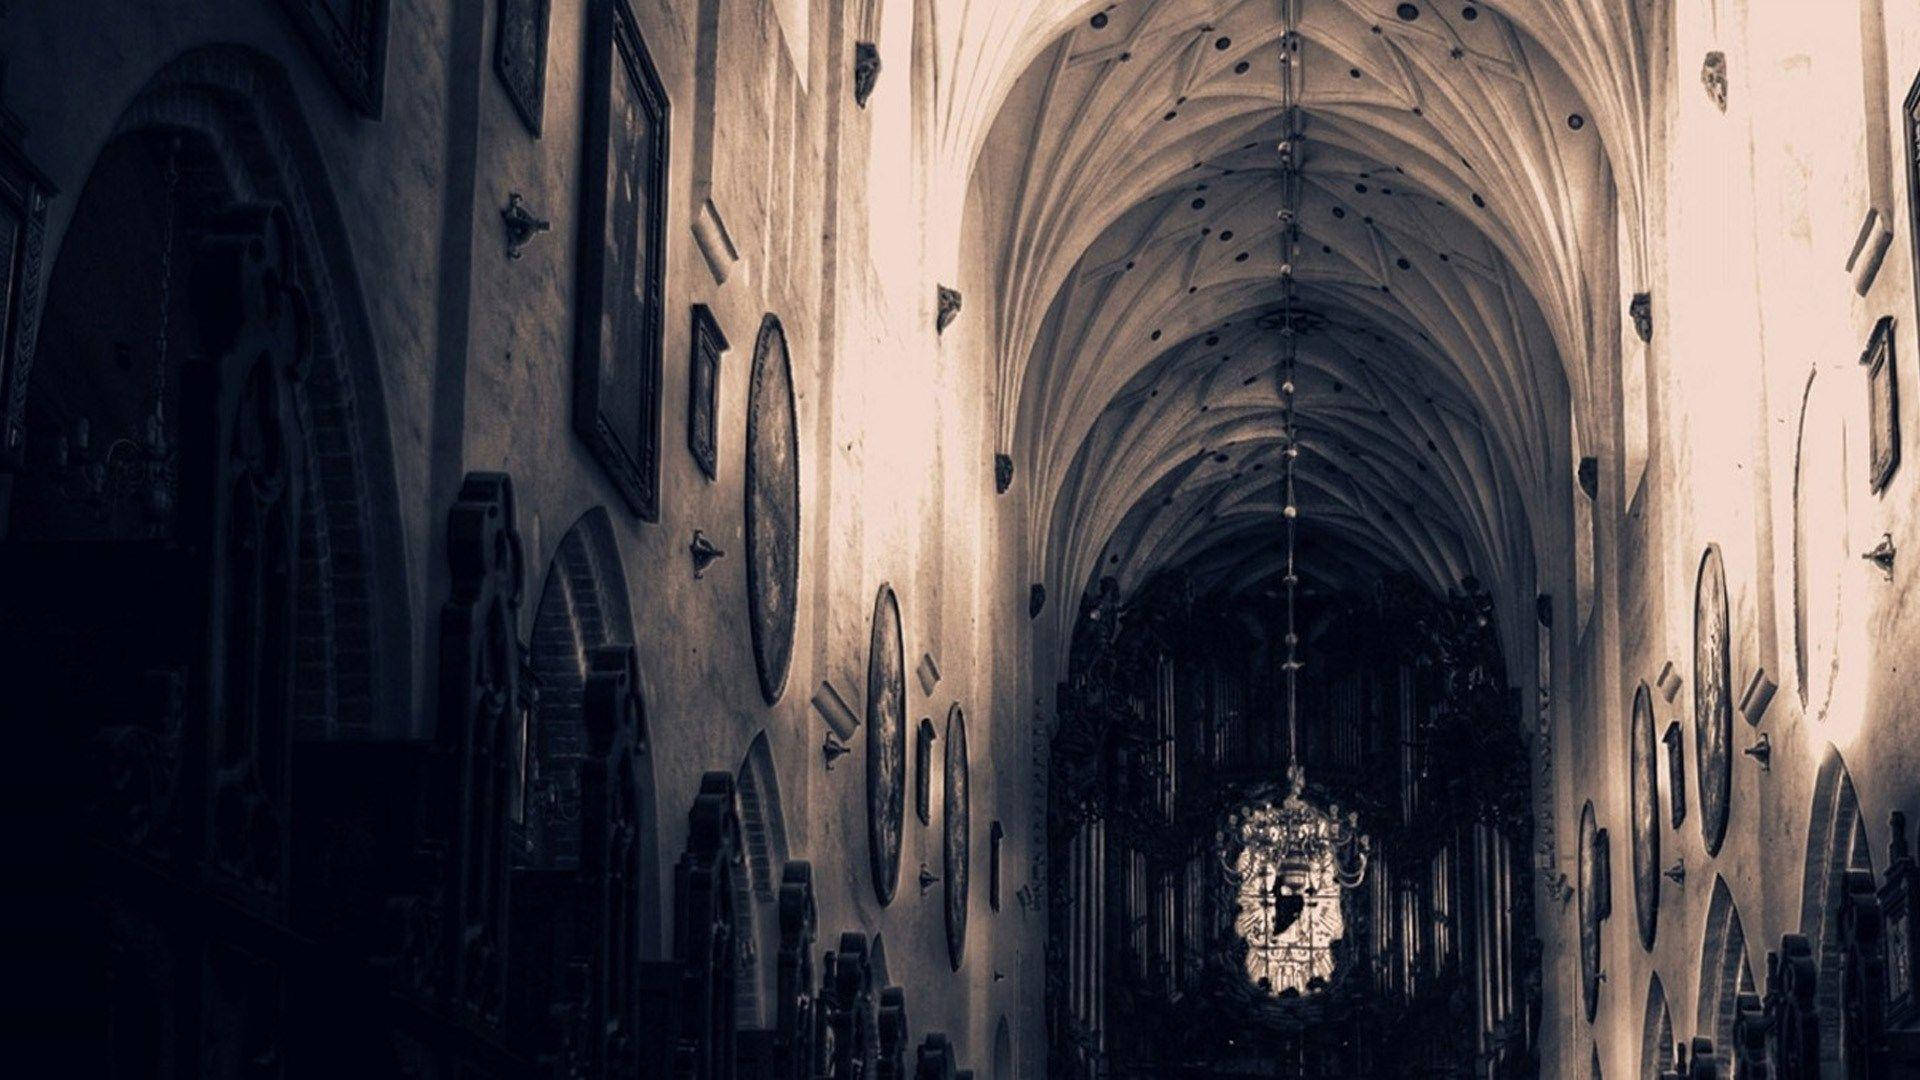 A cathedral with high arched ceilings and a chandelier hanging from the ceiling. - Dark academia